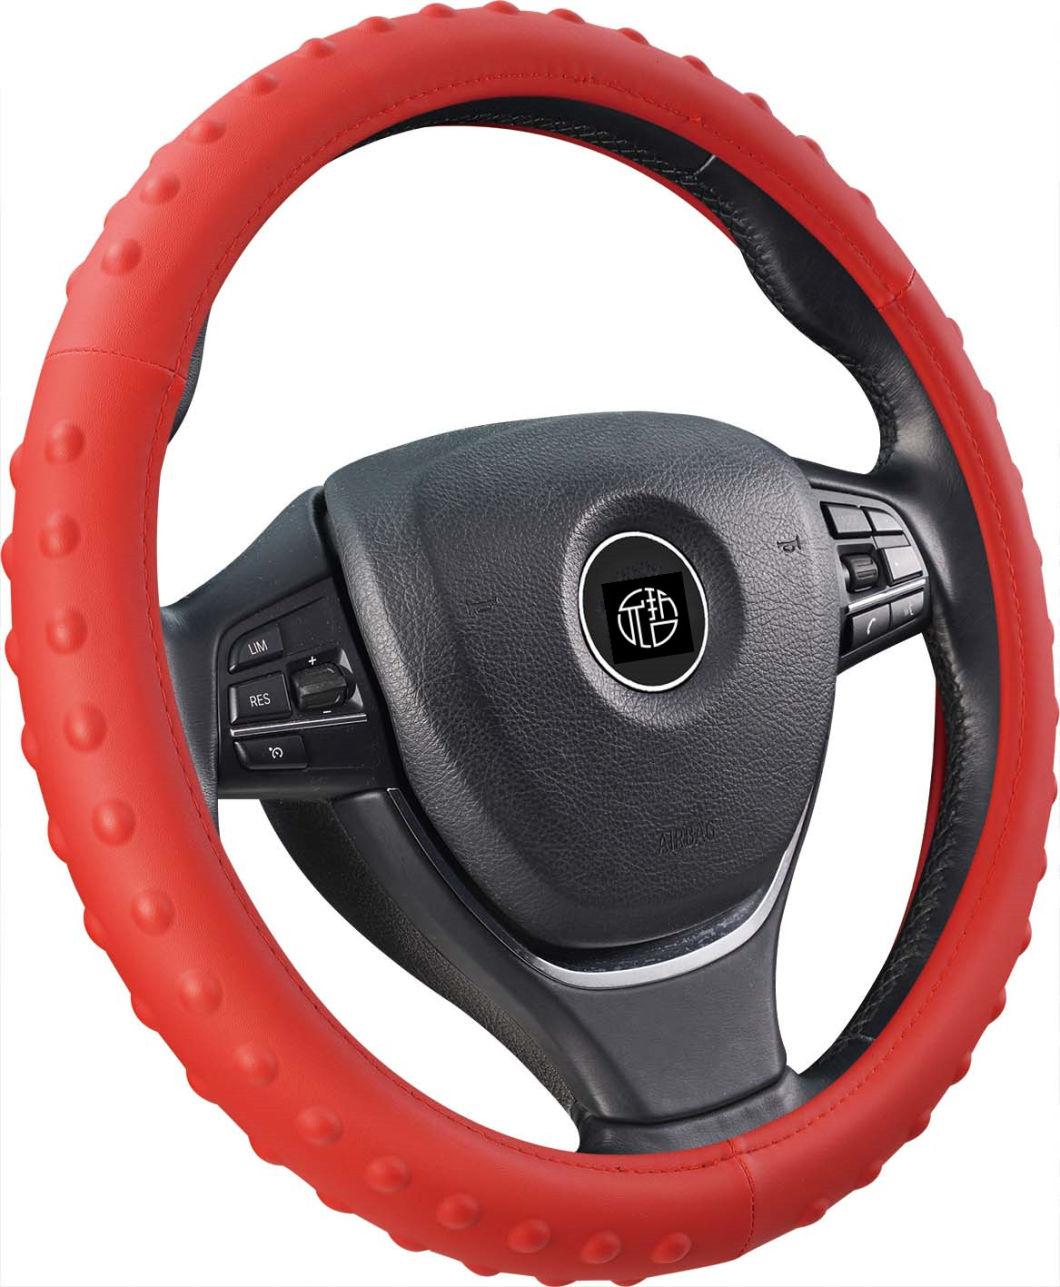 Massage Grip Colorful Anti Skid Soft Touch PVC Steering Wheel Covers